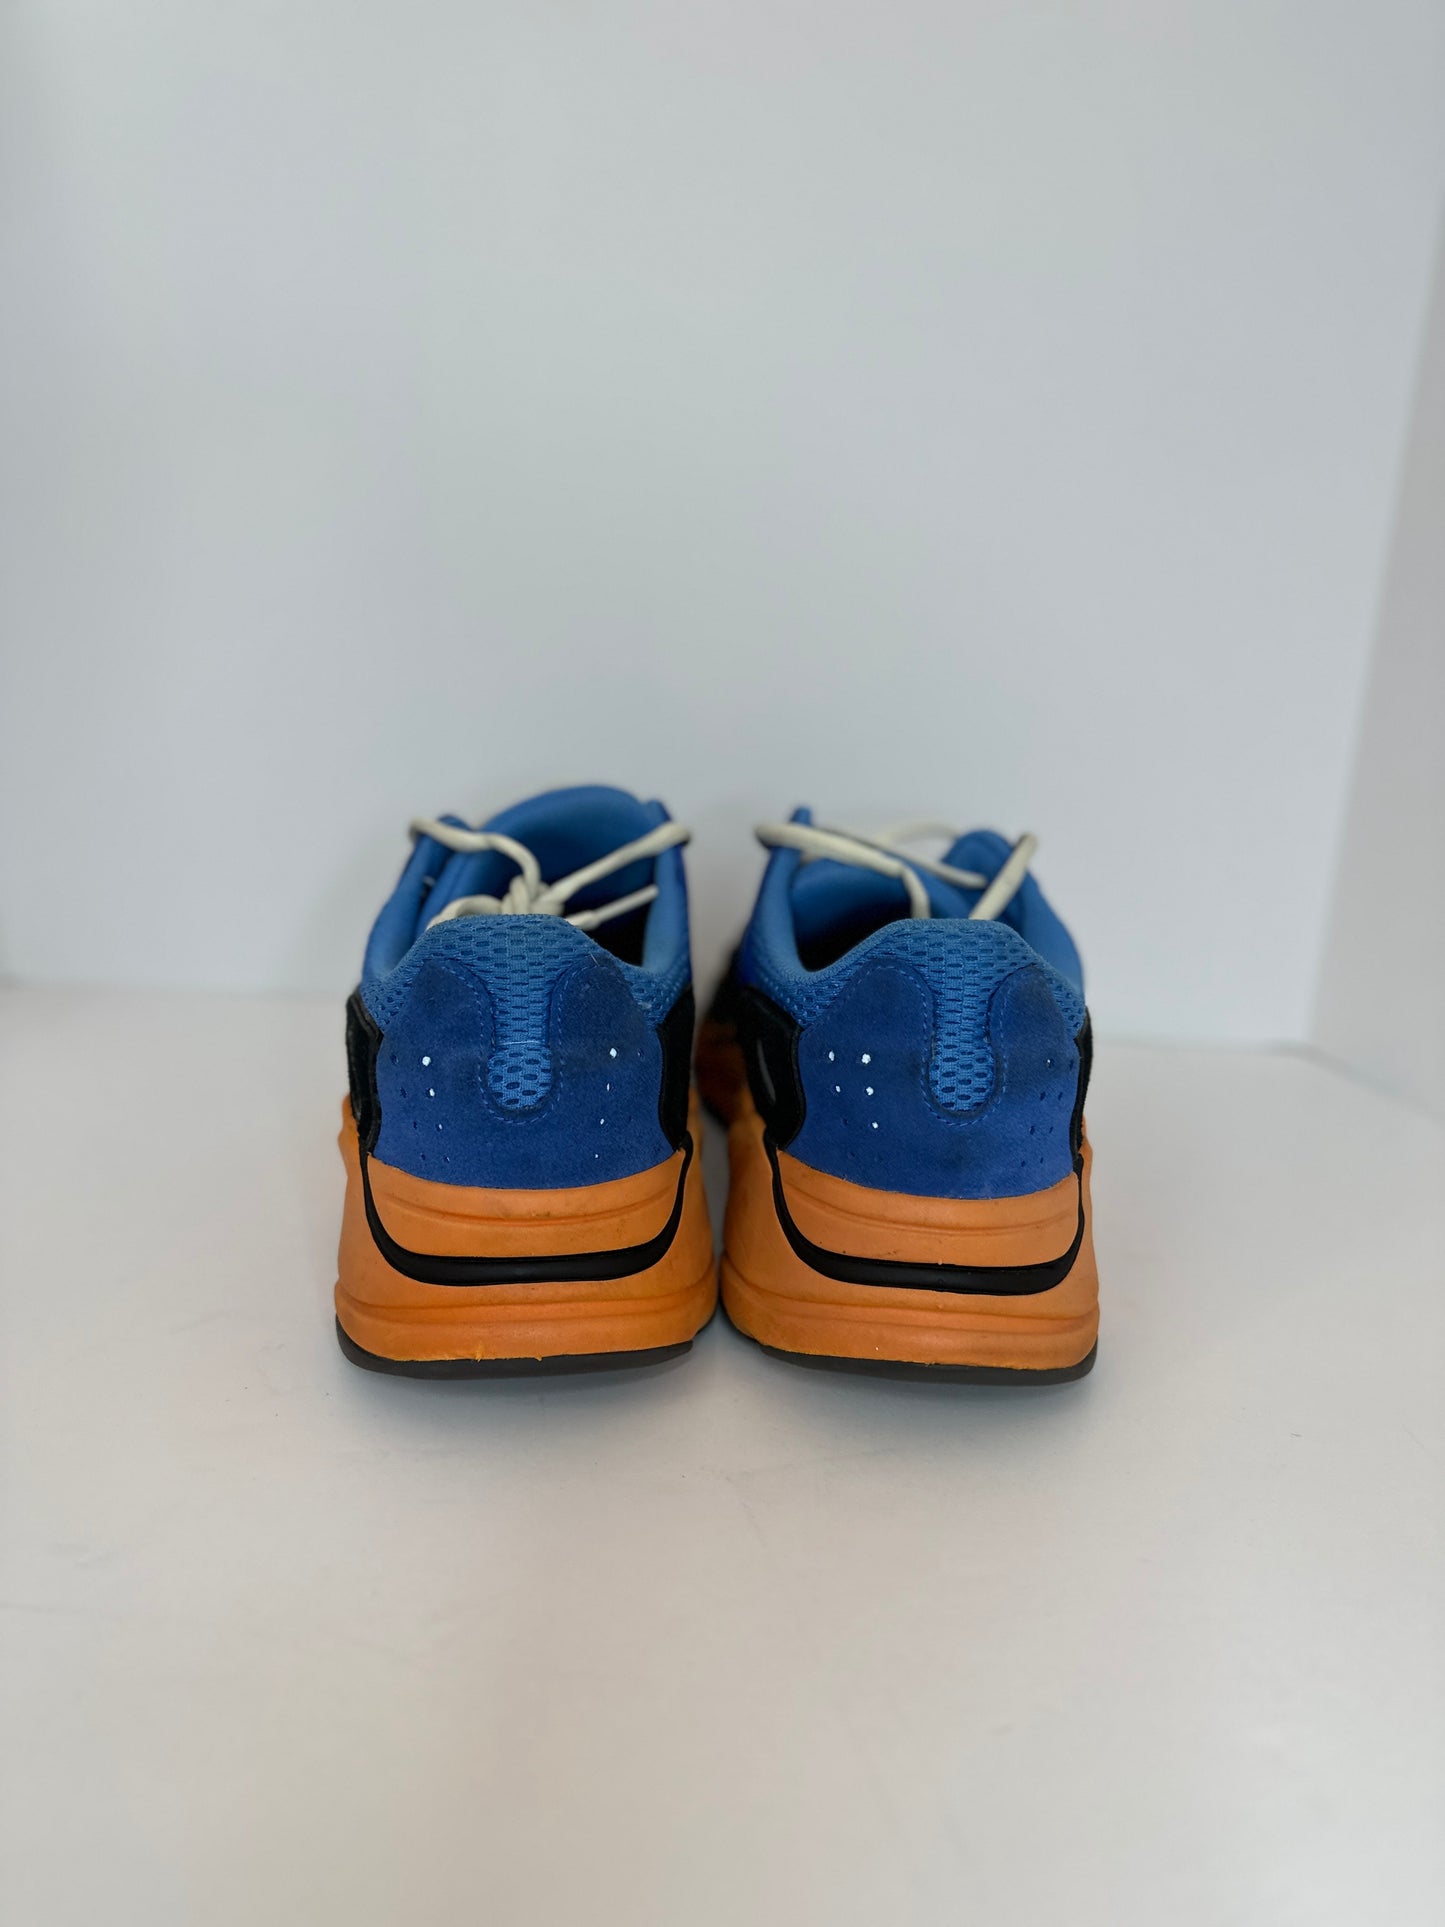 Yeezy 700 Bright Blue Size 12 (rep box) Slightly Used